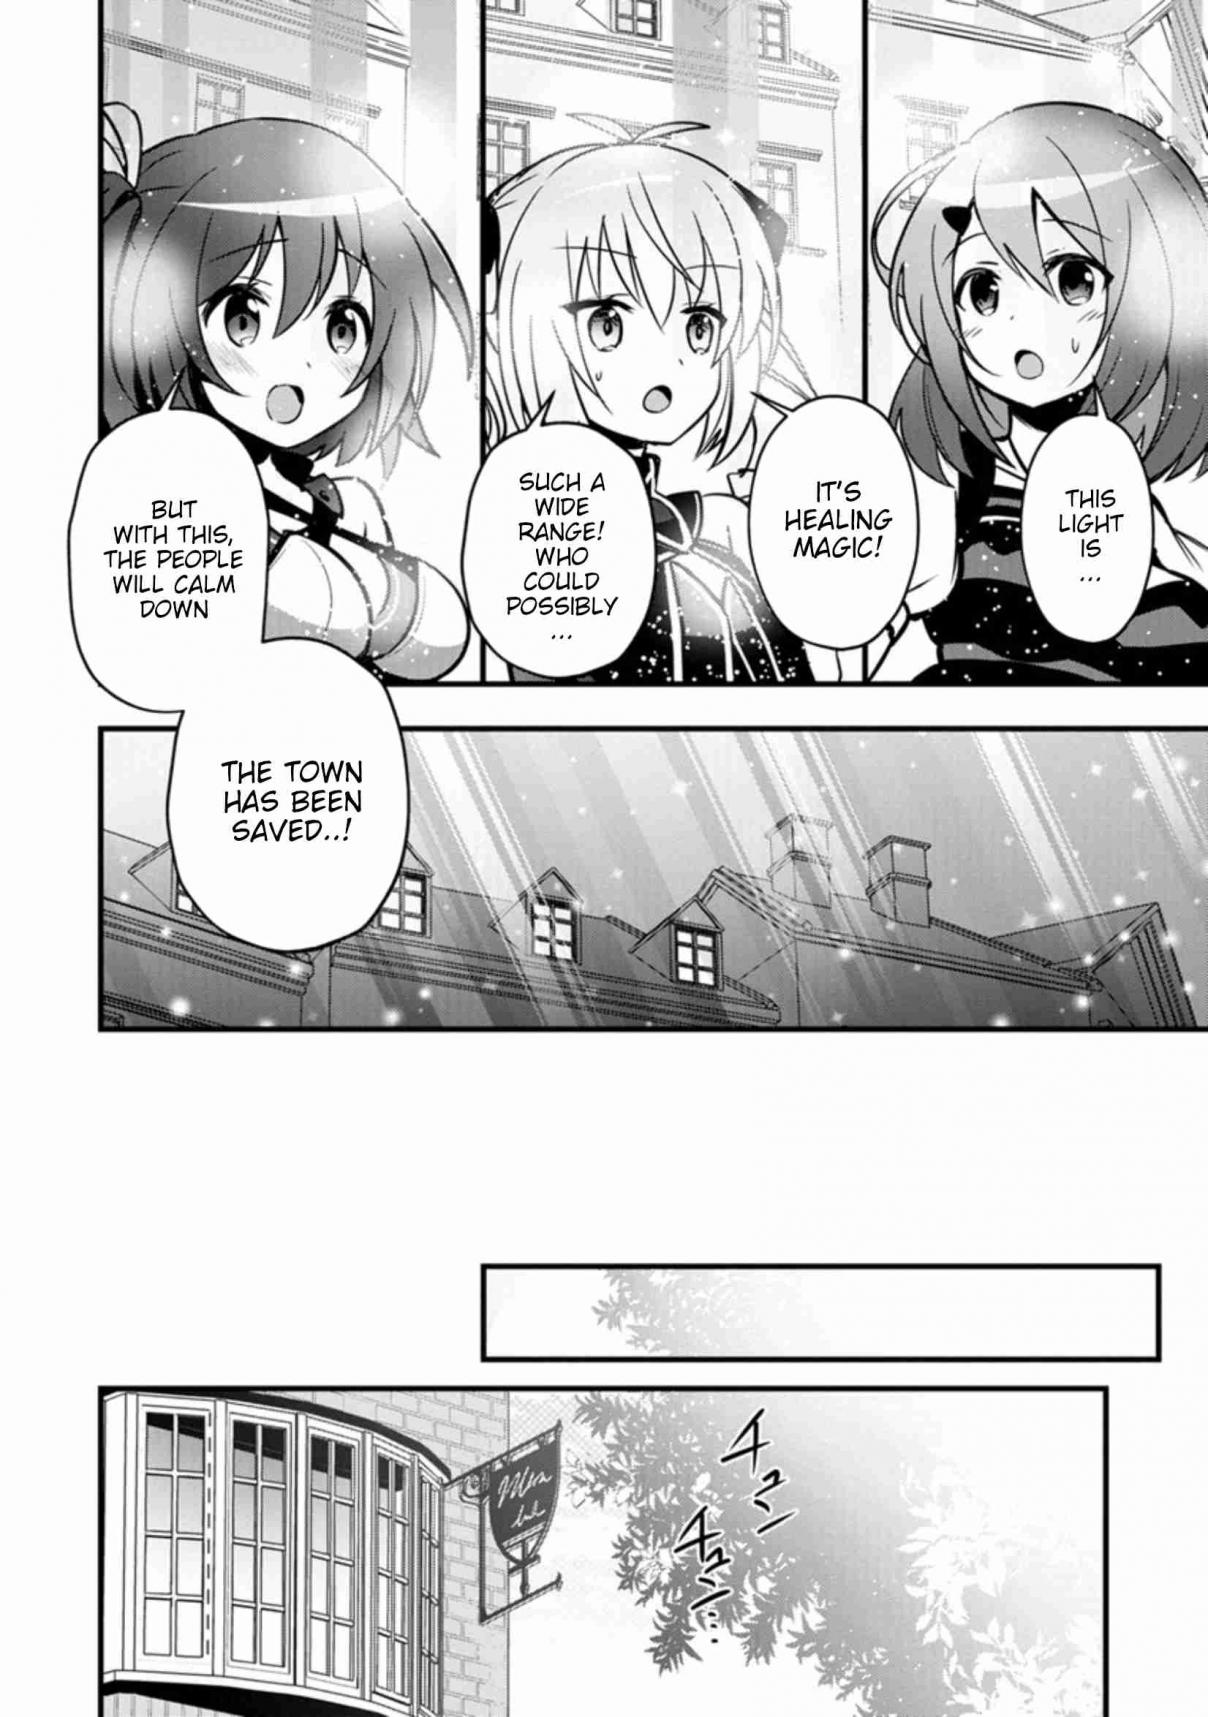 I Work As A Healer In Another World's Labyrinth City Vol. 2 Ch. 10